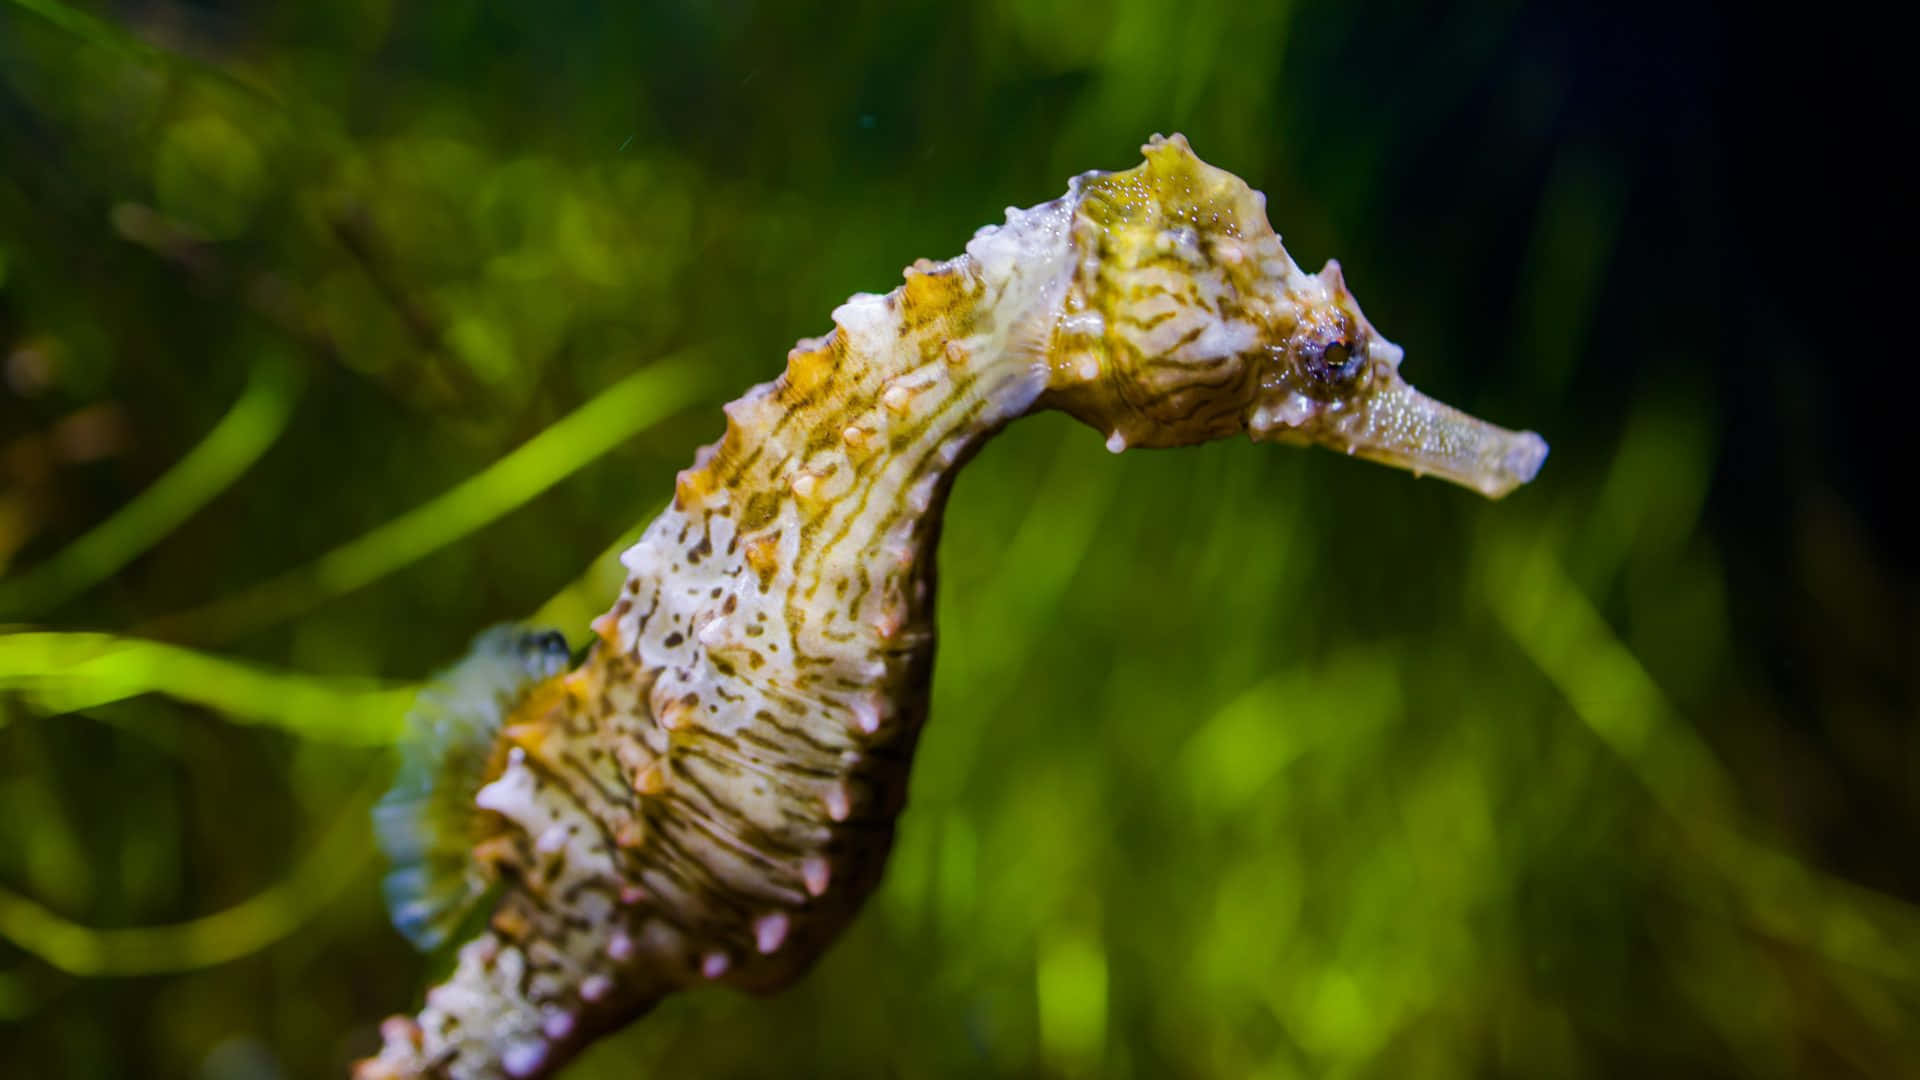 A sea of calm and serenity - this seahorse is living life to the fullest.